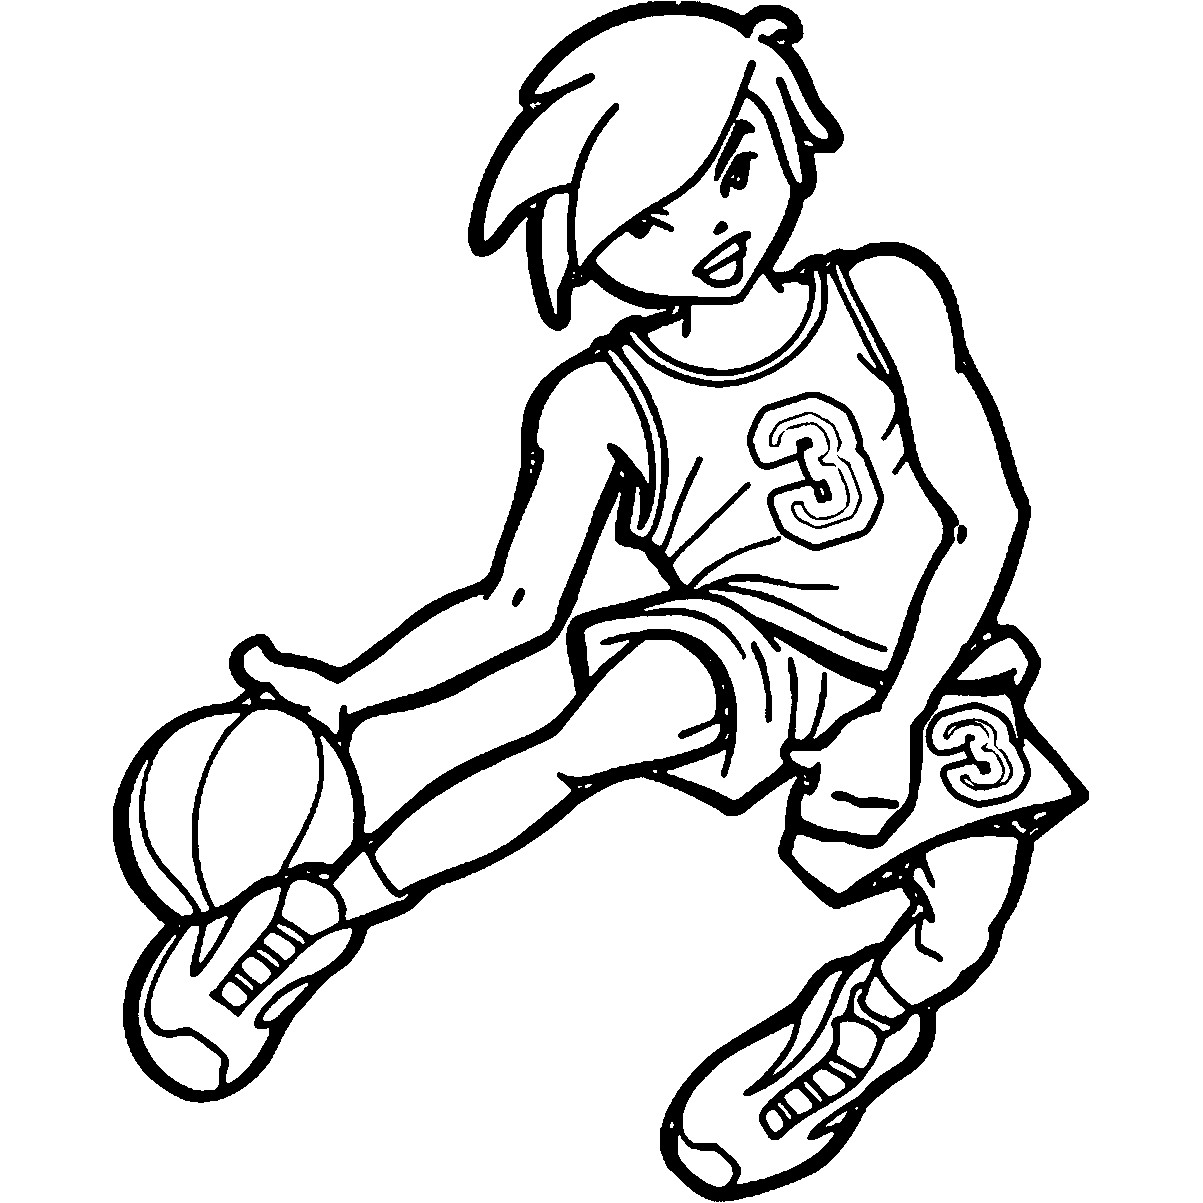 Basketball Coloring Sheets For Boys
 Playing Basketball Coloring Pages